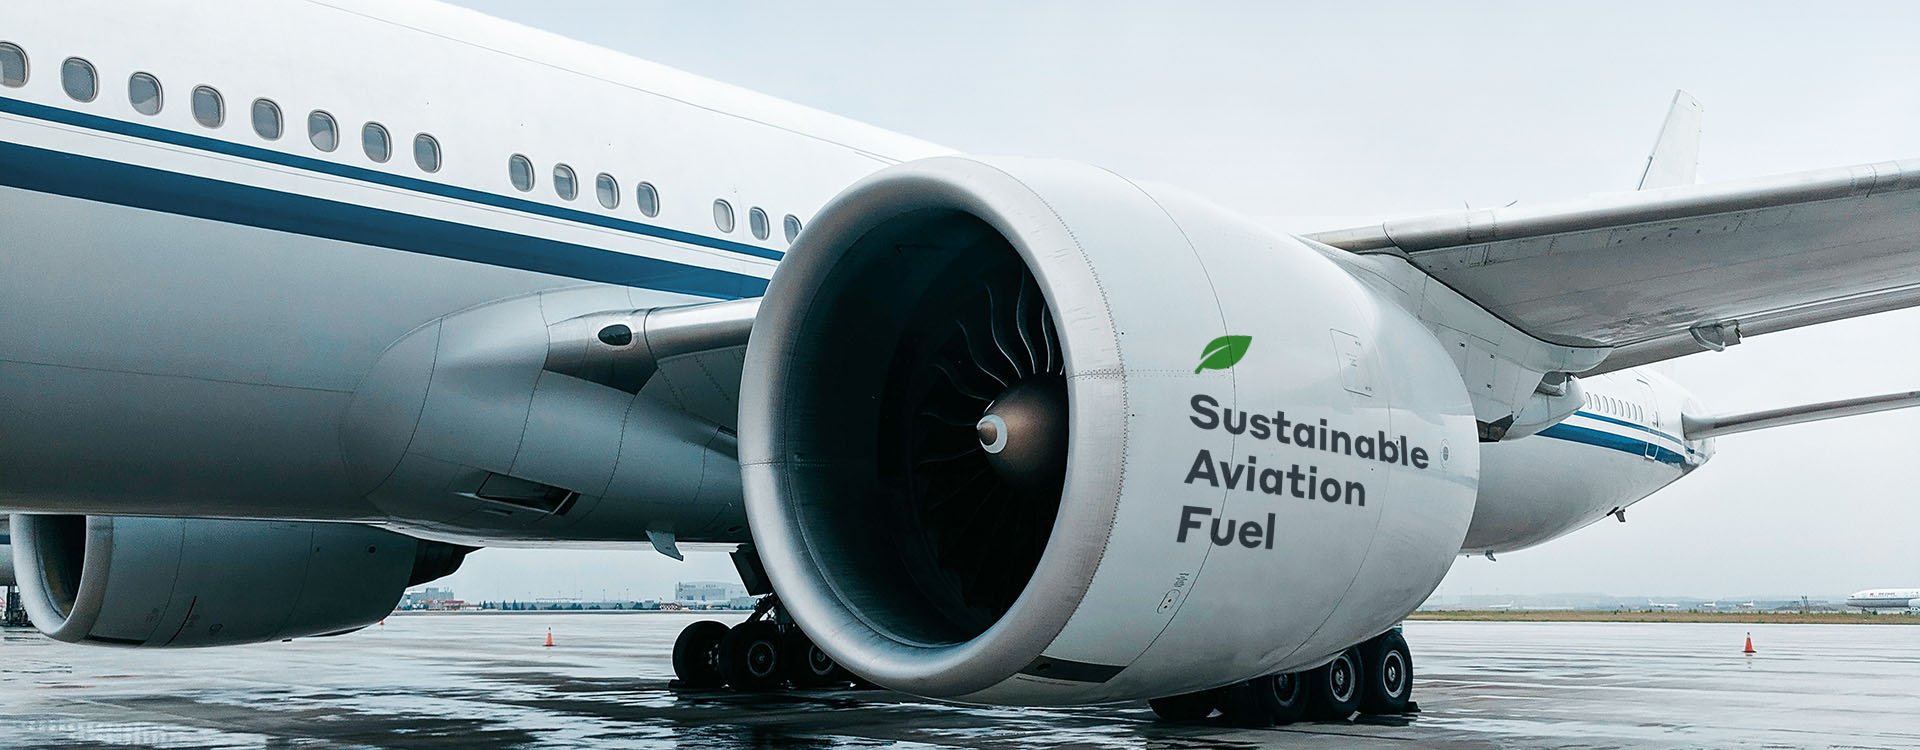 Sustainable Aviation Fuel Helps Airlines In Minimizing Their Emissions Without Changing Engine Design